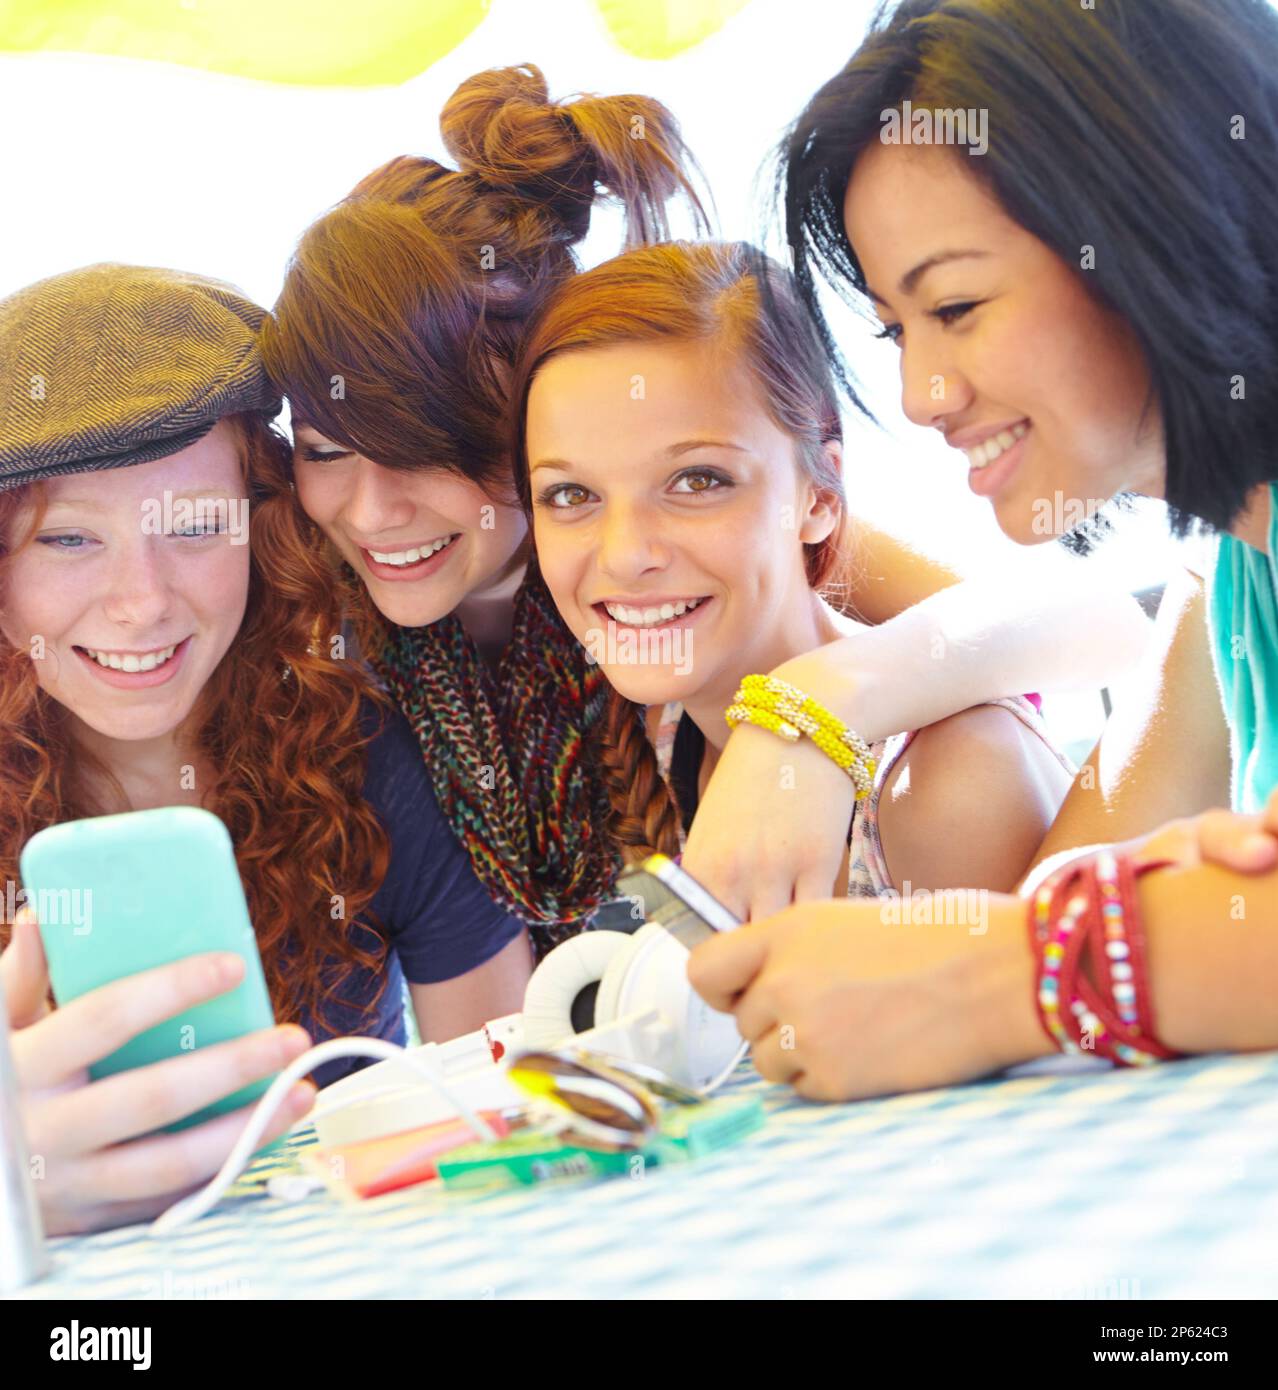 Teen technology. A group of adolescent girls laughing as they look at something on a smartphone screen. Stock Photo